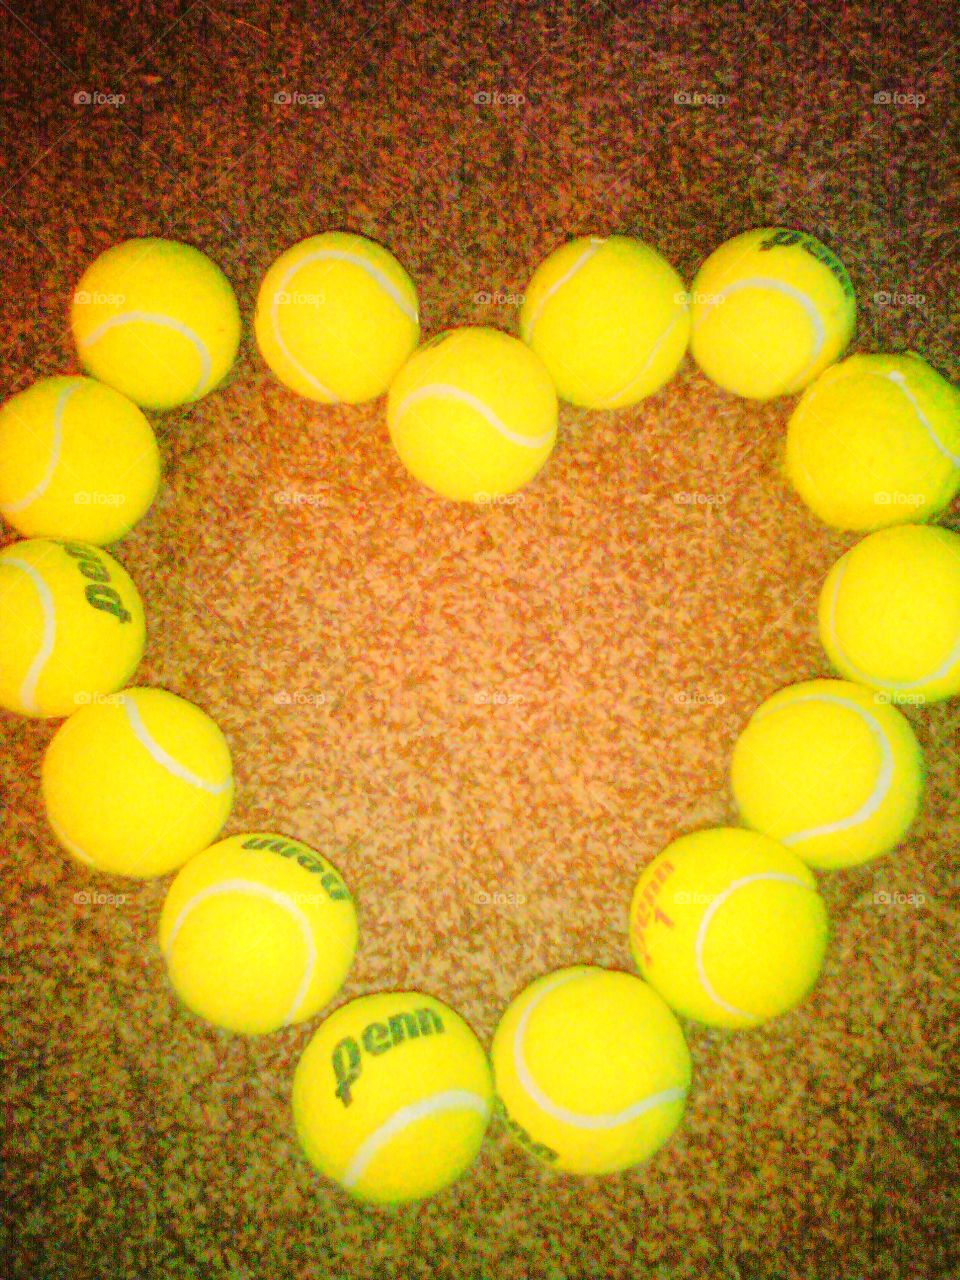 tennis ball heart. made this before the dog grabbed his tennis balls. he loves to play with them.